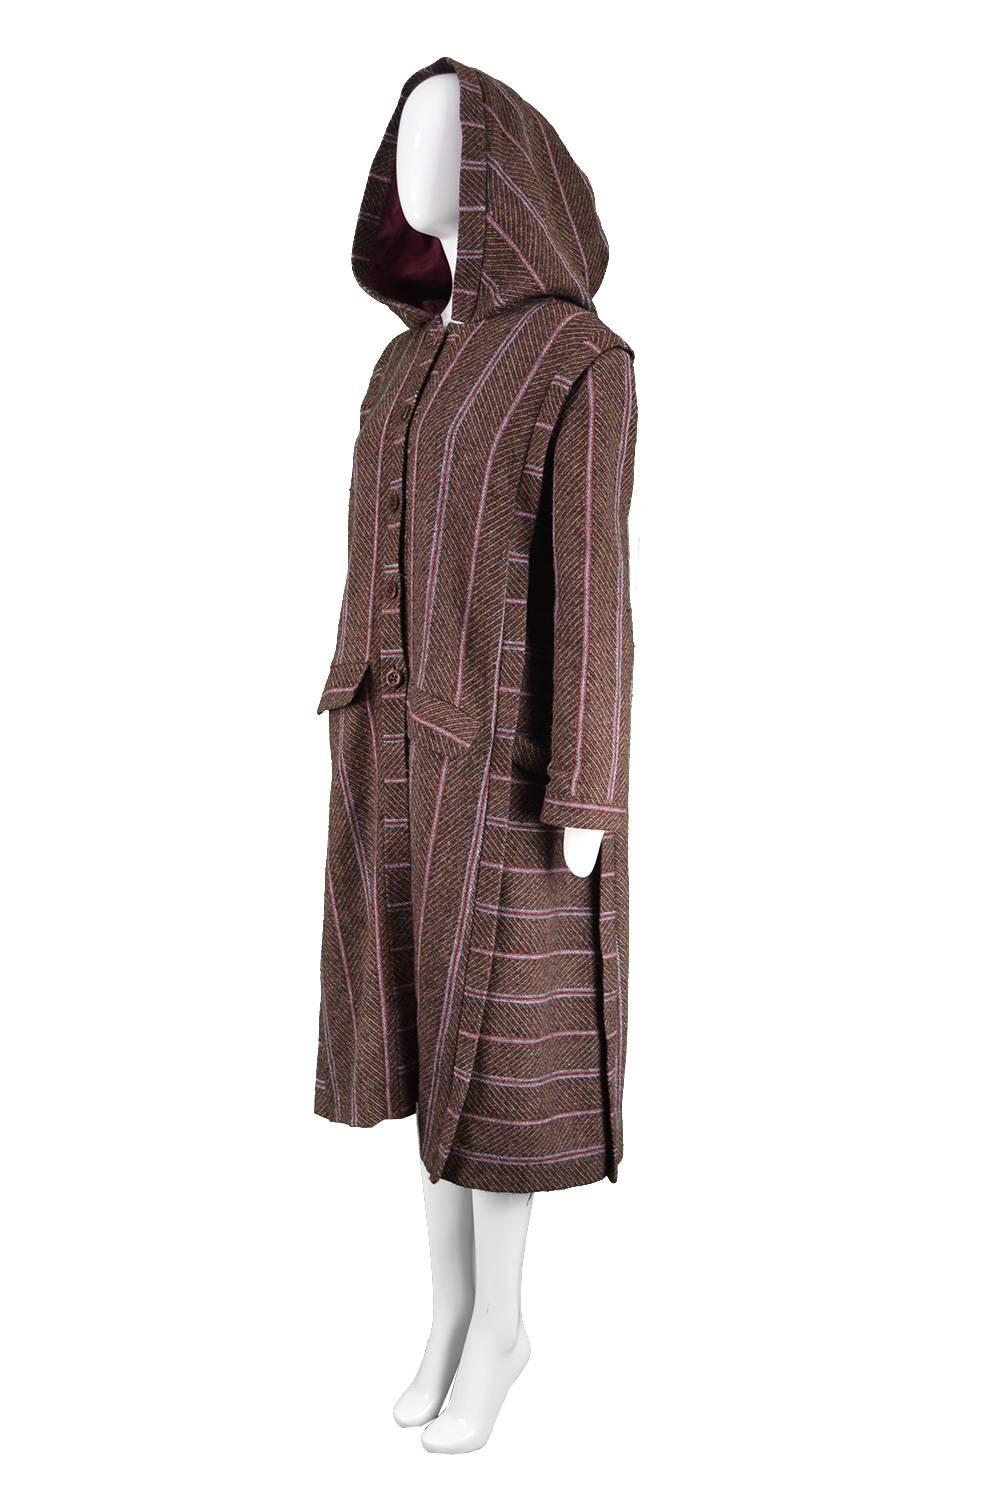 Women's Bill Gibb Dramatic Brown Wool Striped Vintage Coat with Oversized Hood, 1970s